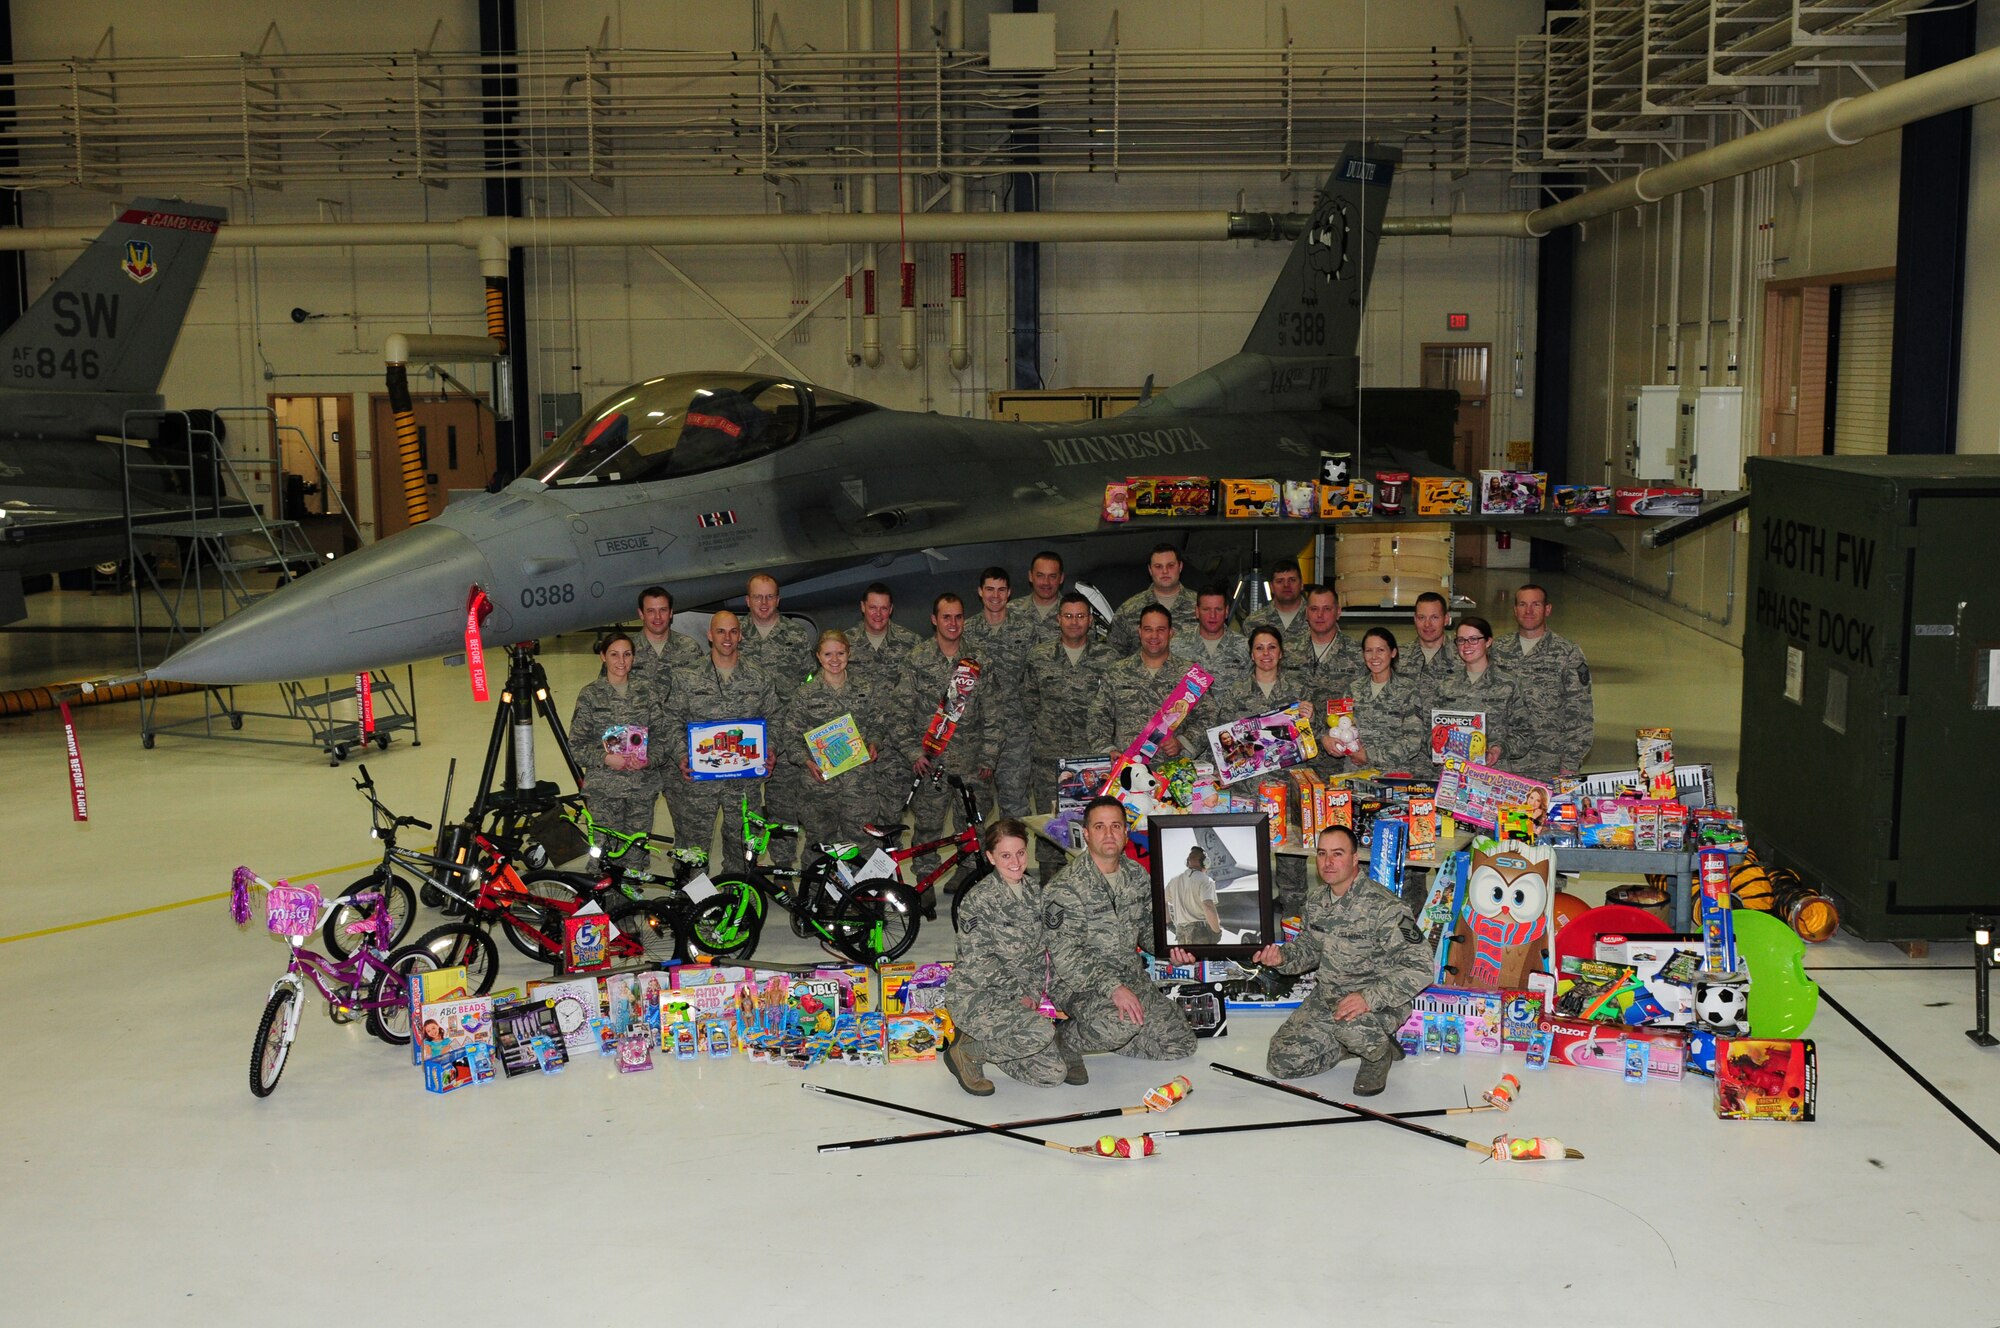 U.S. Air Force F-16C Fighting Falcon crew chiefs and other members of the 148th Fighter Wing display the children's toys that were purchased as the result of the Inaugural Ryan Ewald Memorial Toy Drive, December 16, 2013.  The Wing wide Toy Drive raised over 3,000 dollars which was used to purchase toys that were donated to local charities in the Duluth, Minn. area.  (U.S. Air National Guard photo by Master Sgt. Ralph J. Kapustka/Released)